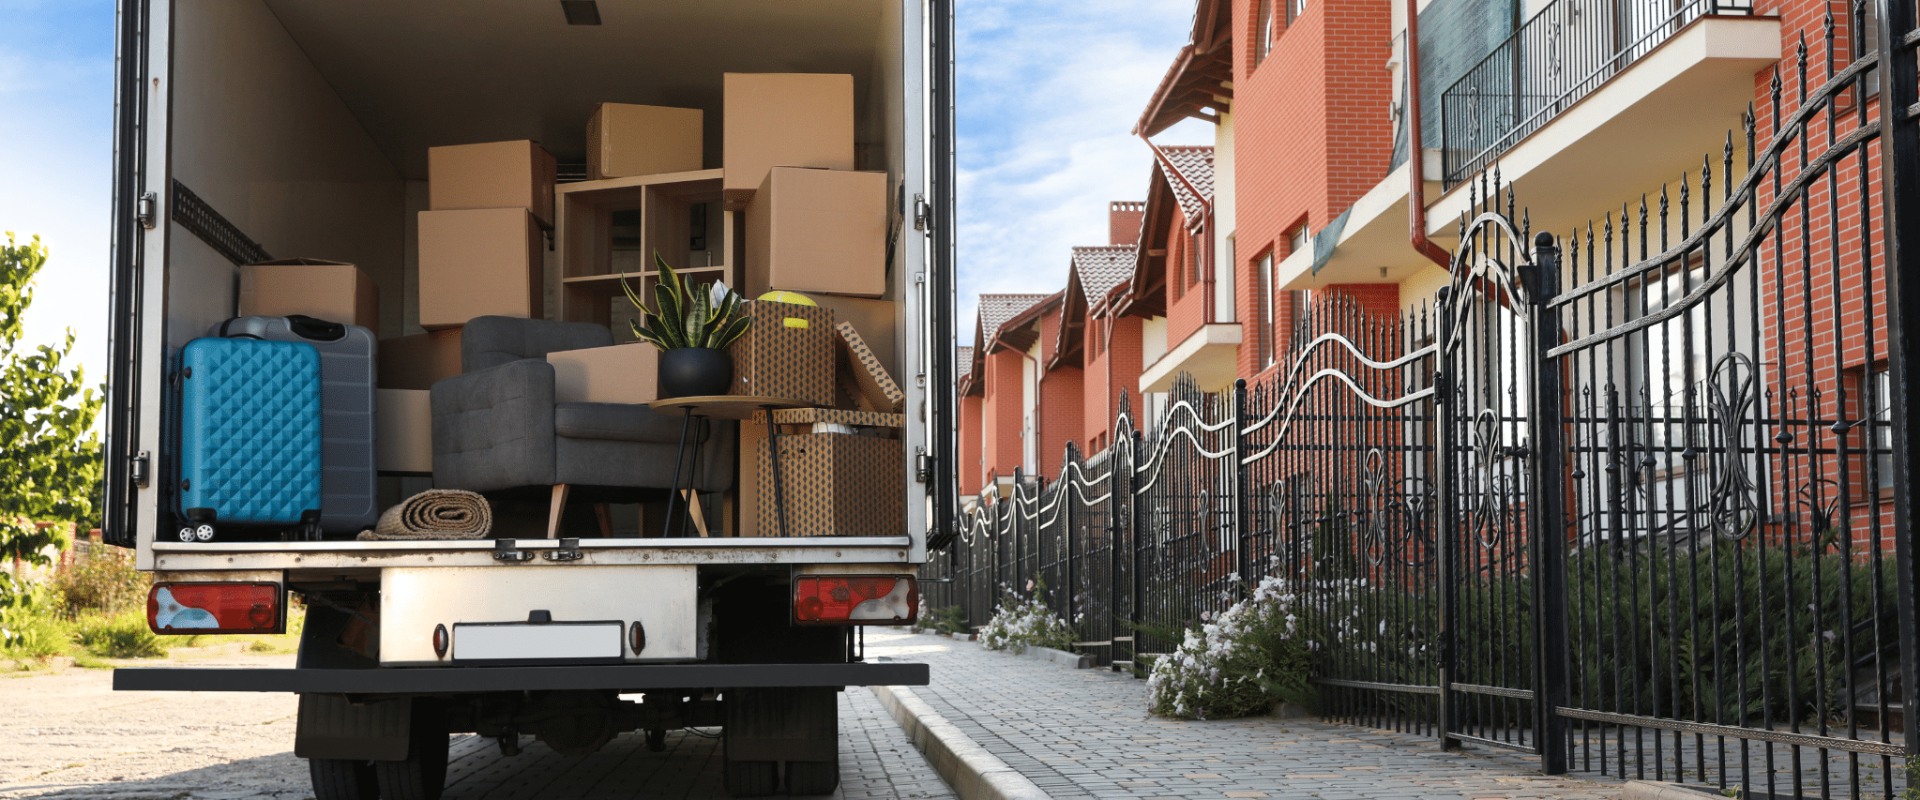 How to Minimize Costs for Your Interstate or Cross-Country Move